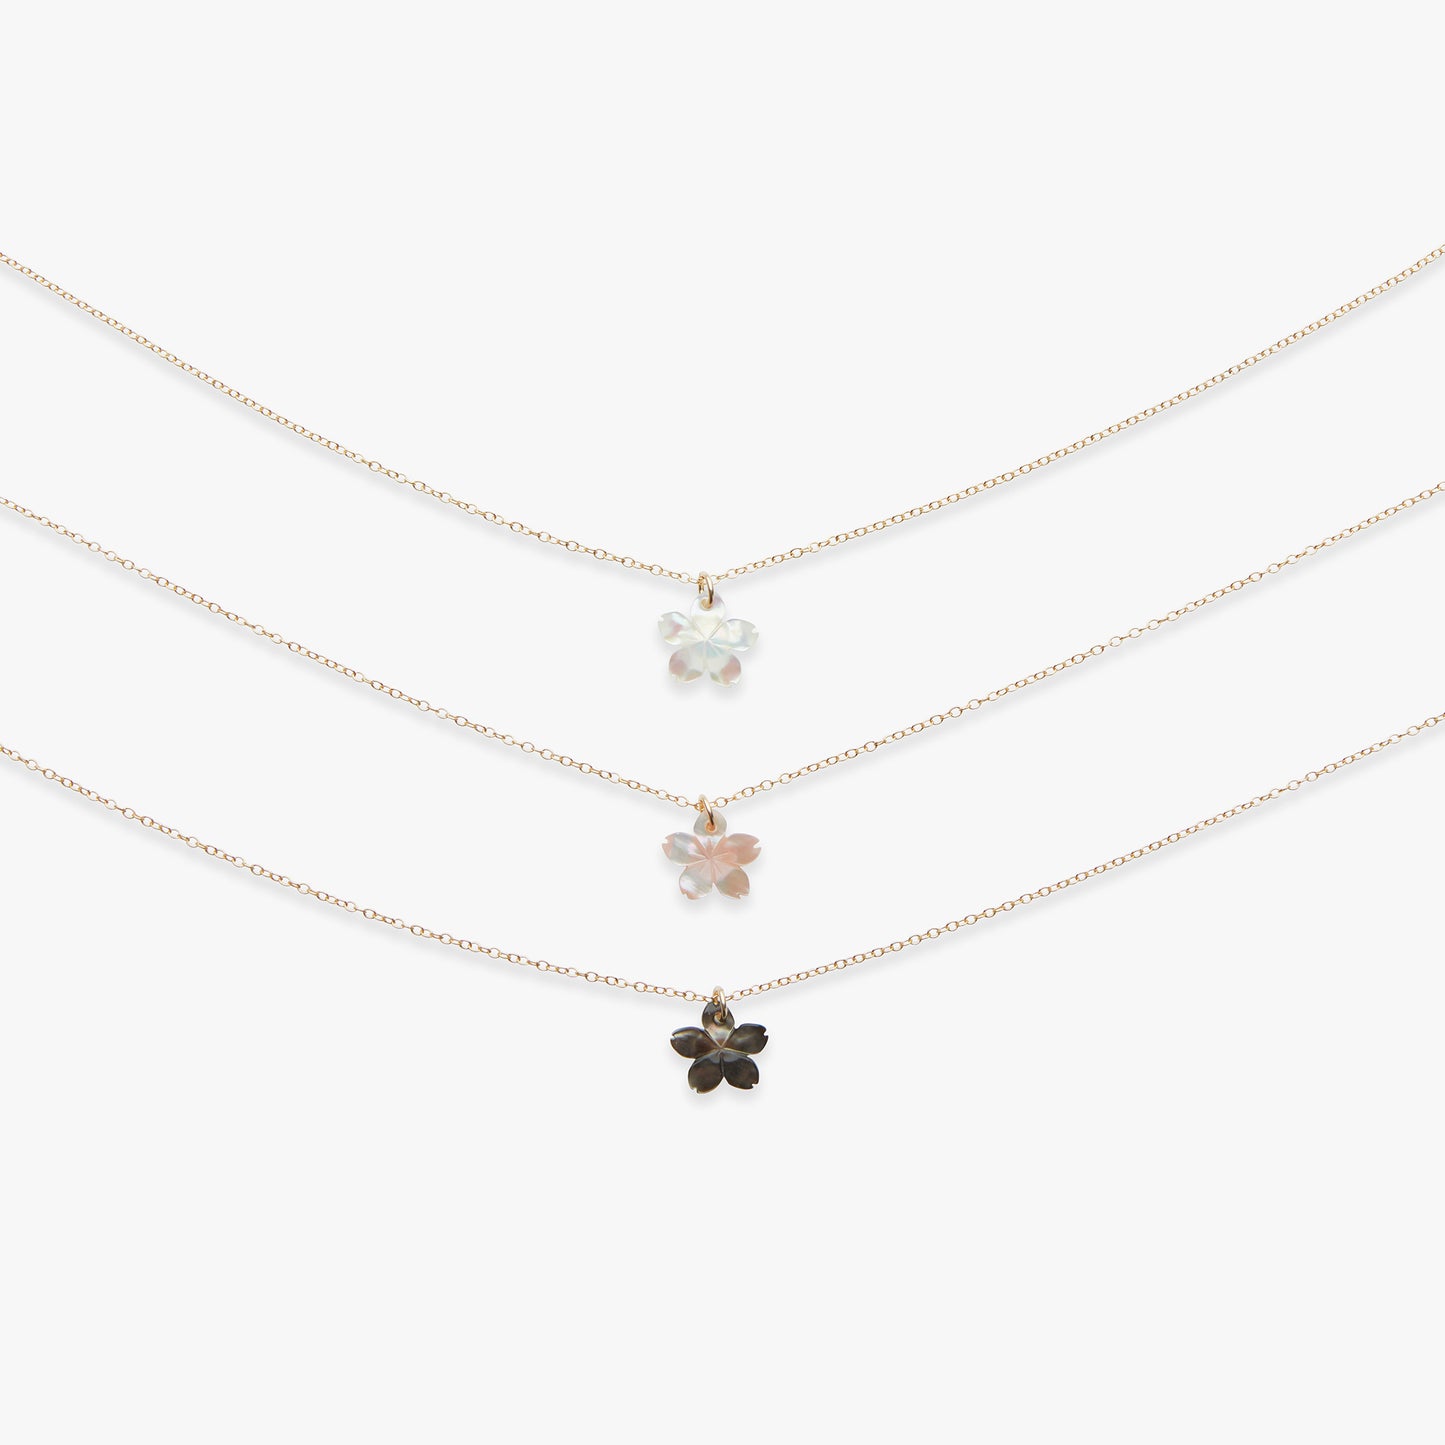 Laad afbeelding in Galerijviewer, Pearly Plumeria ketting gold filled
